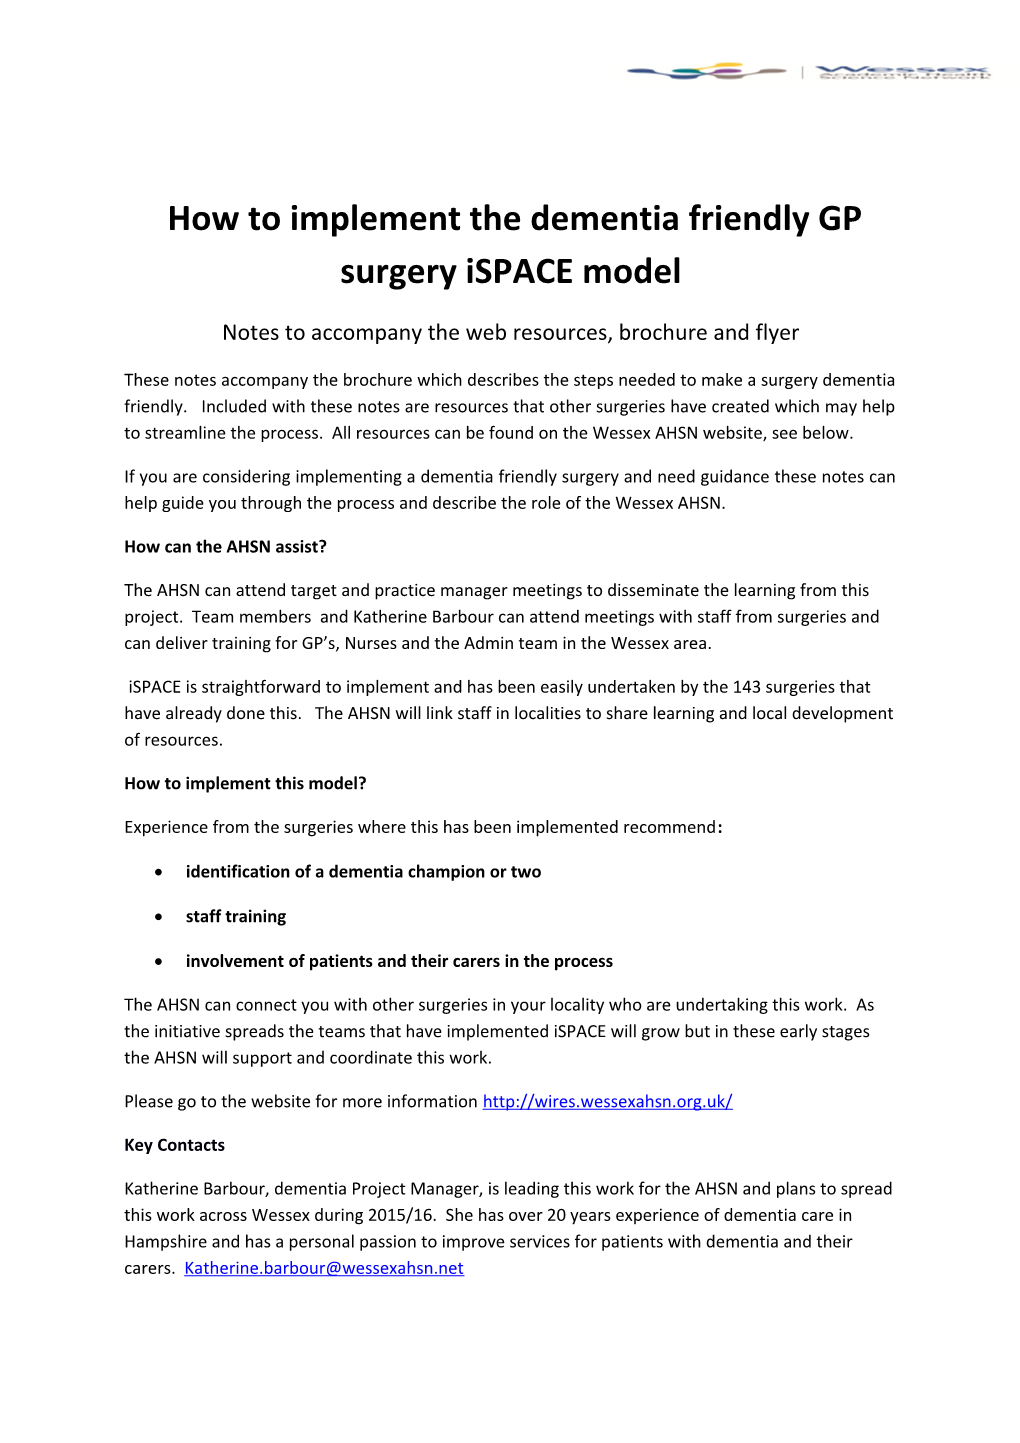 How to Implement the Dementia Friendly GP Surgery Ispace Model